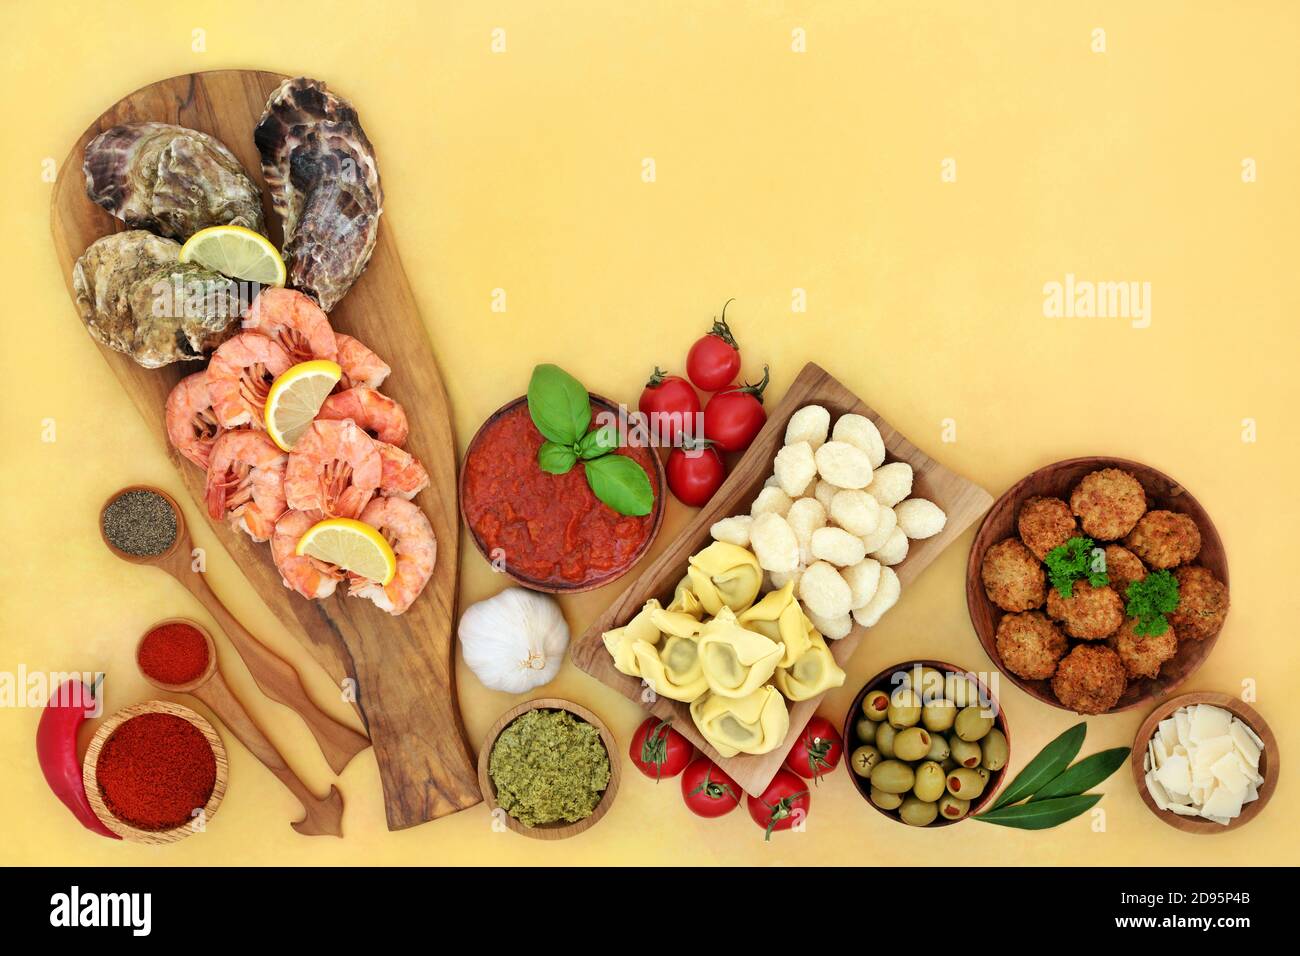 Italian sunshine food for a healthy balanced diet low in cholesterol, with seafood, pasta, vegetables, meatballs, cheese & sauces. High in antioxidant Stock Photo